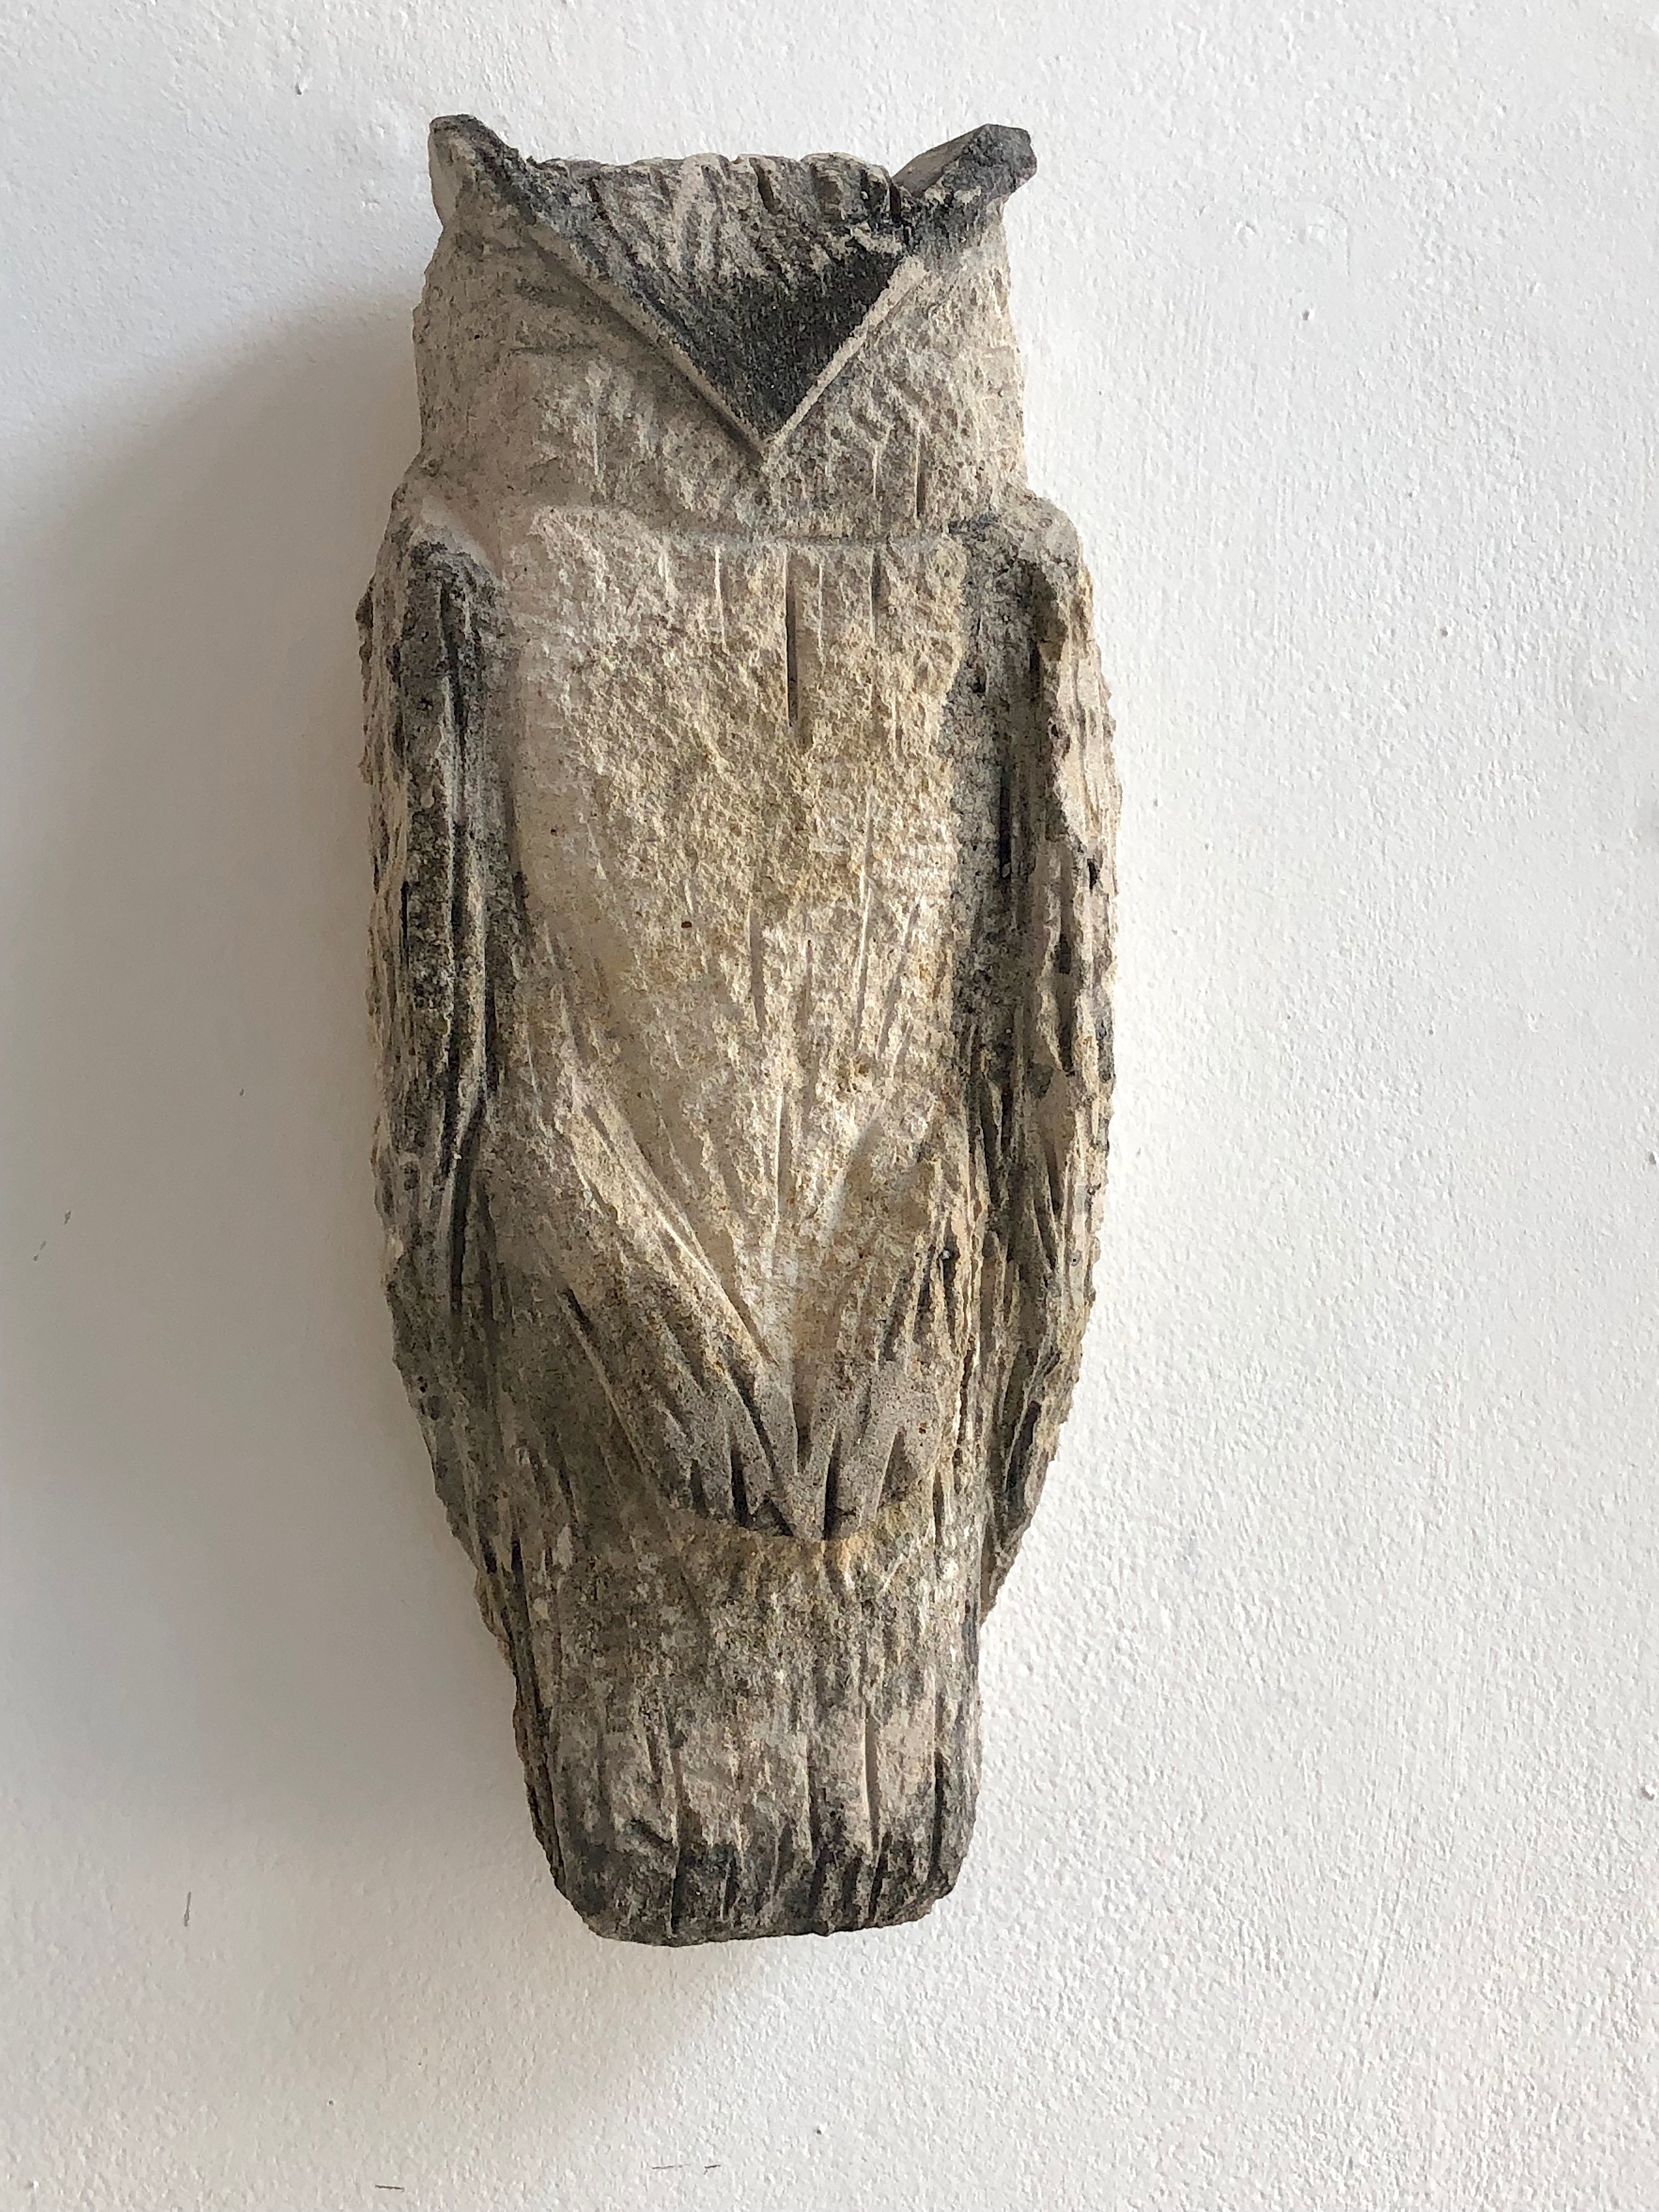  “Scruffy Wall Owl,” 2019  Provencal limestone and pigment 14 x 6 x 3.5 inches 